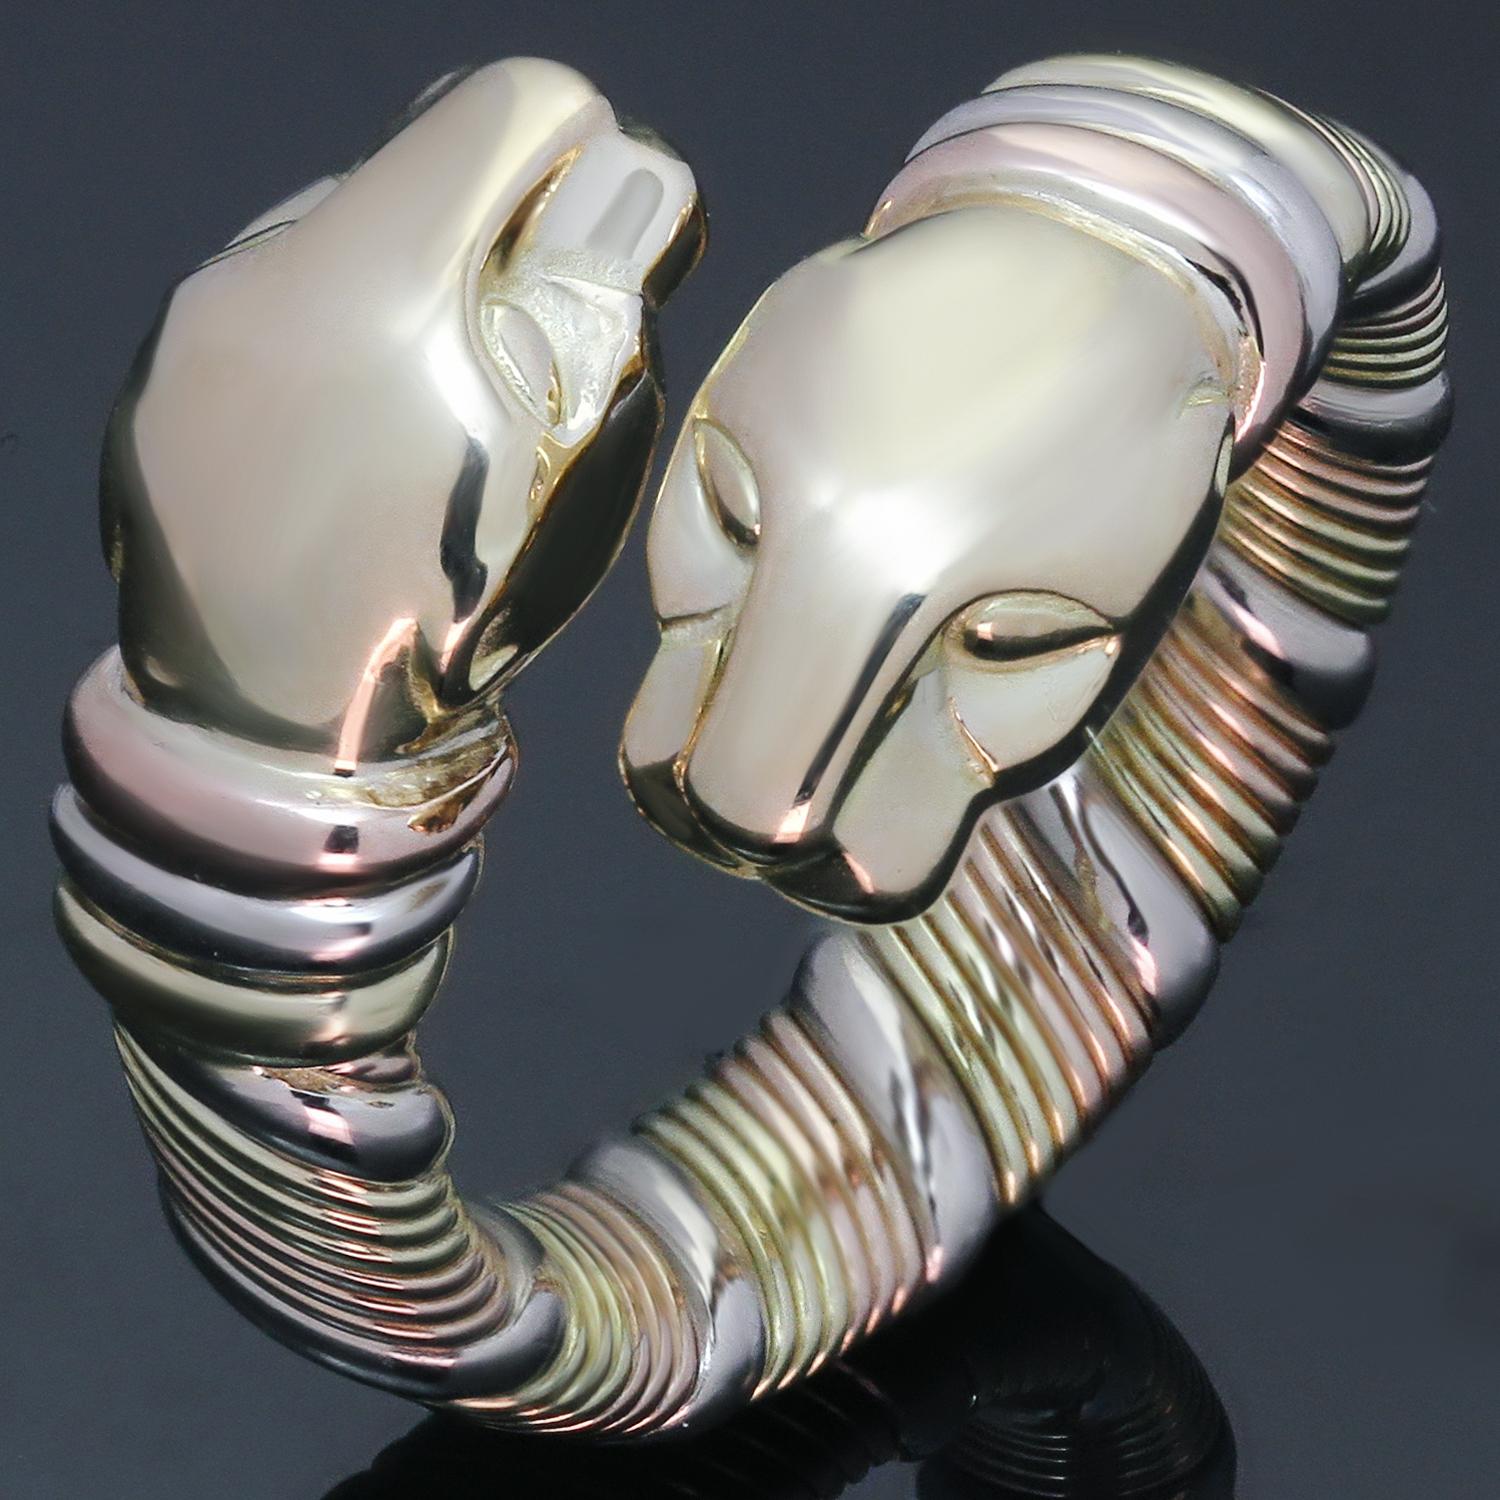 This fabulous Cartier ring features a coiled double headed panther design crafted in 18k yellow, white, and rose gold. The ring is slightly flexible from size 6 to 6.5. Made in France circa 1980s. Measurements: 0.59